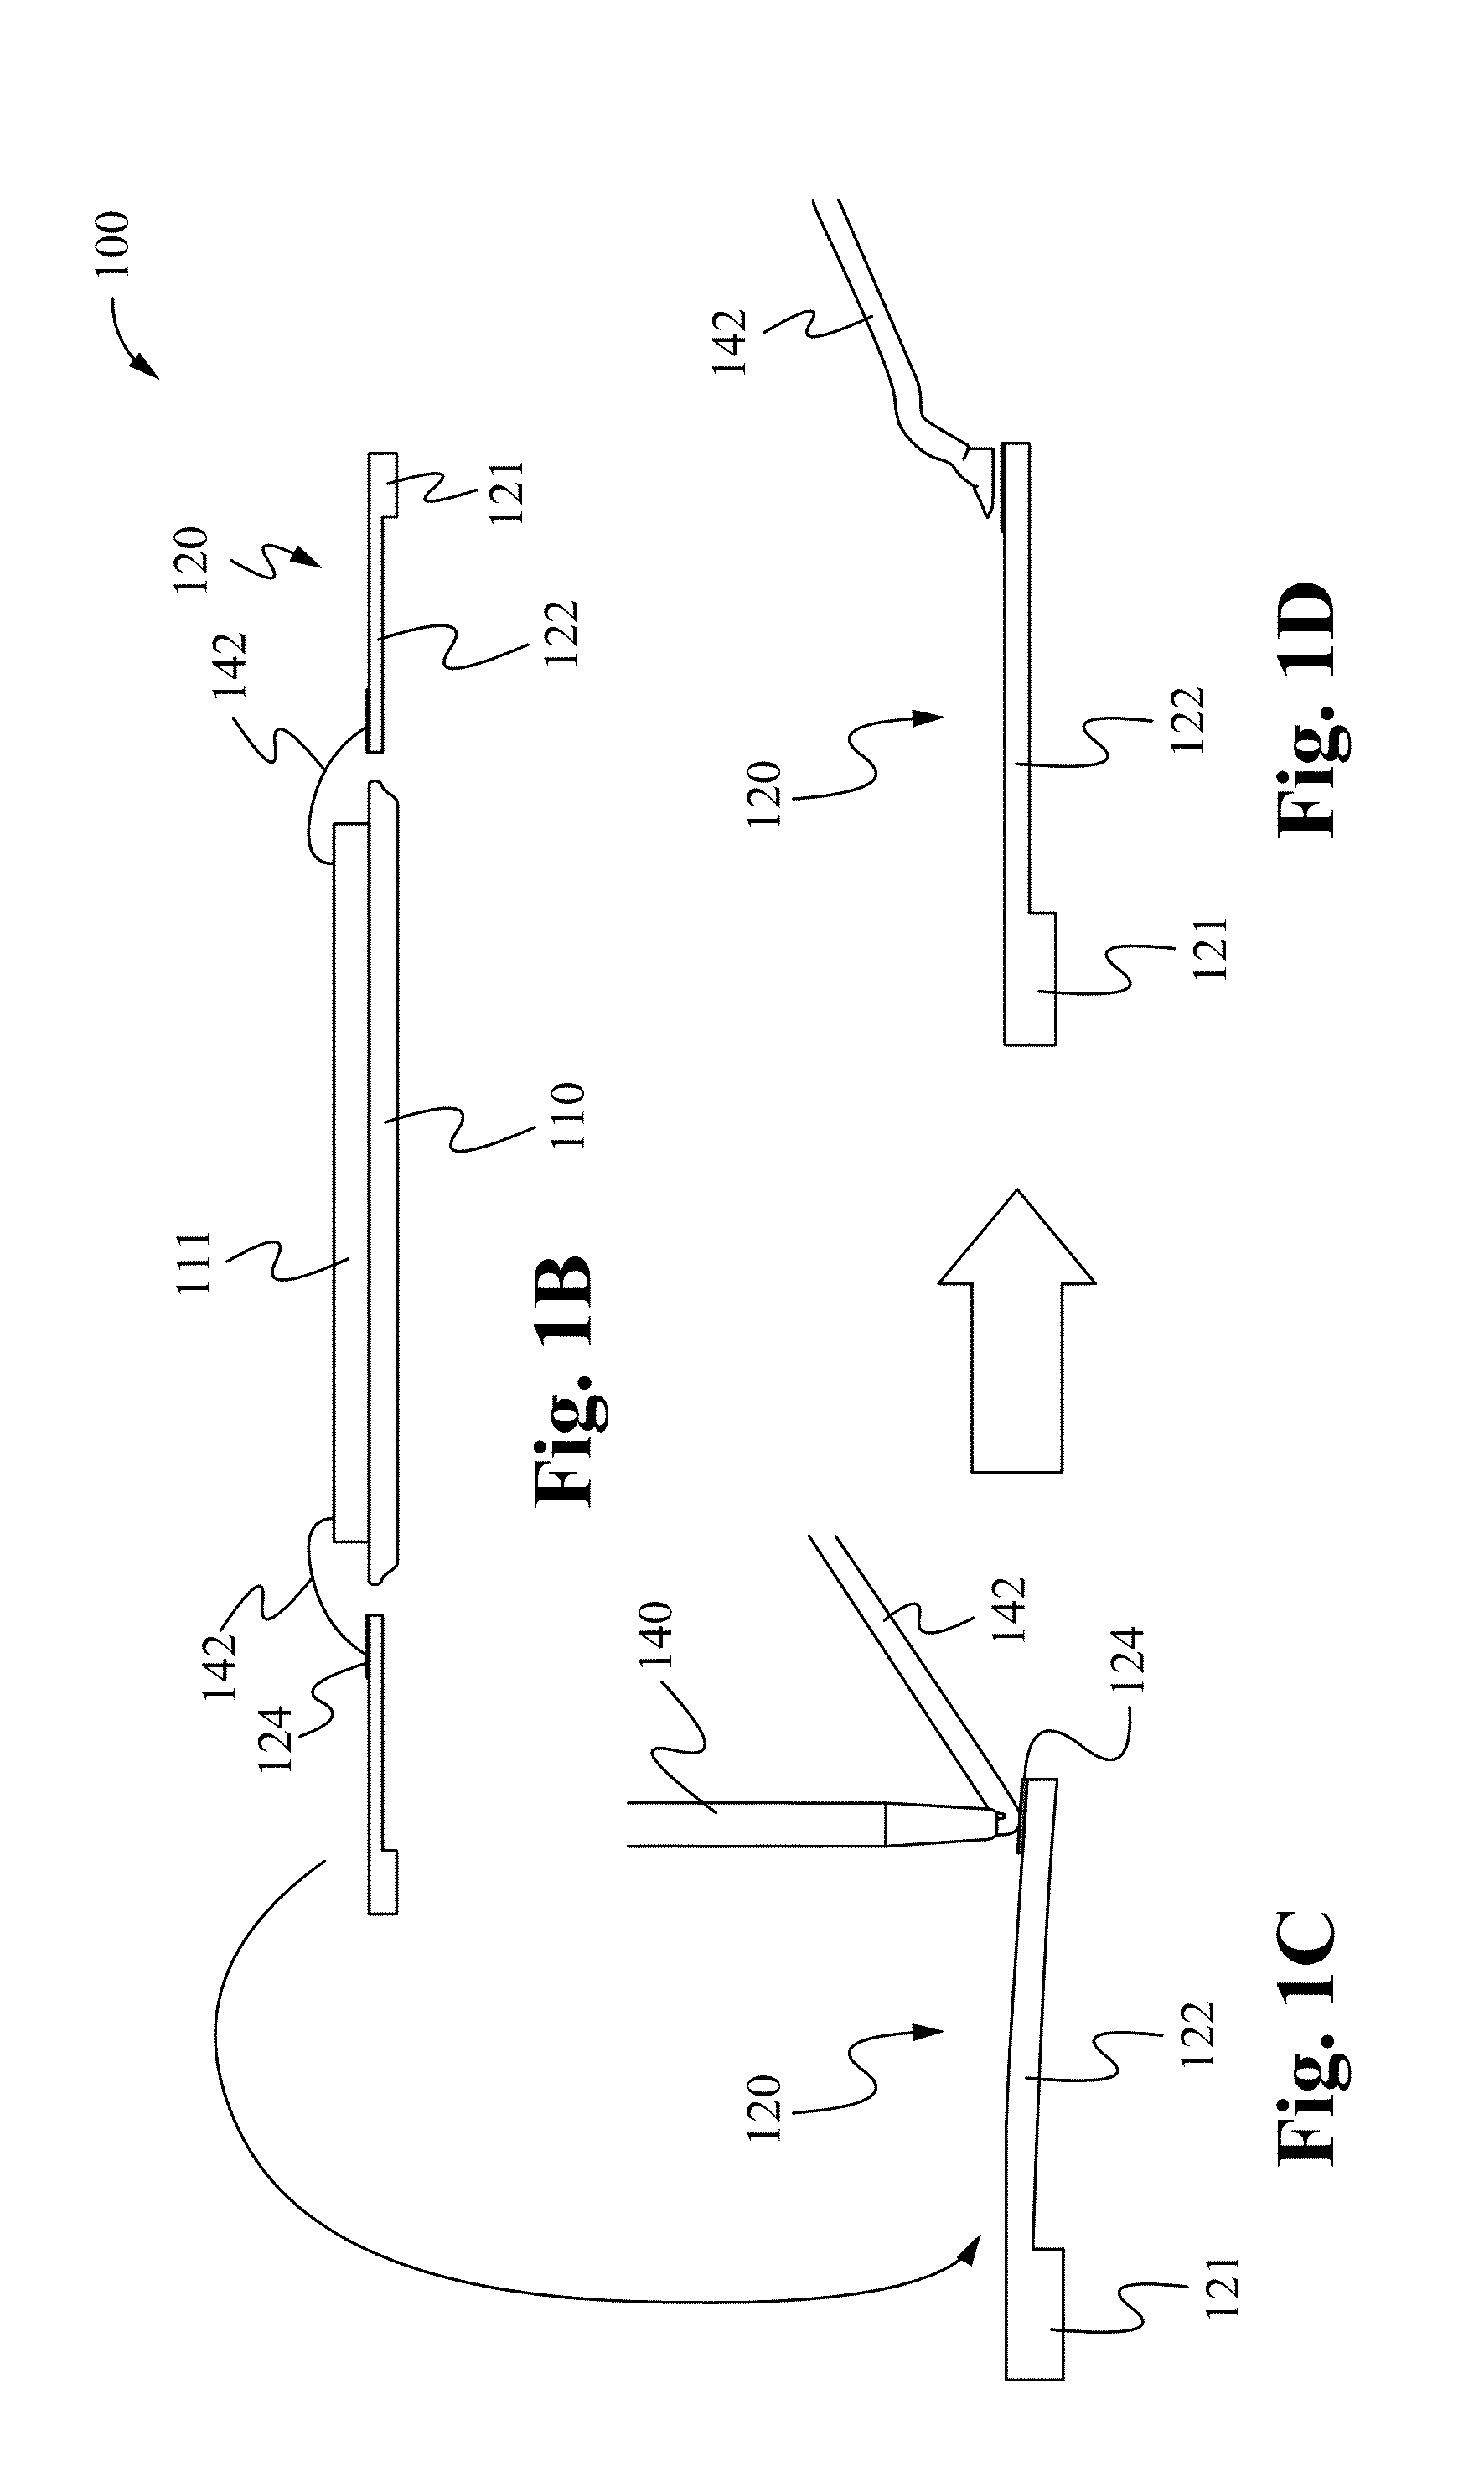 Auxiliary leadframe member for stabilizing the bond wire process